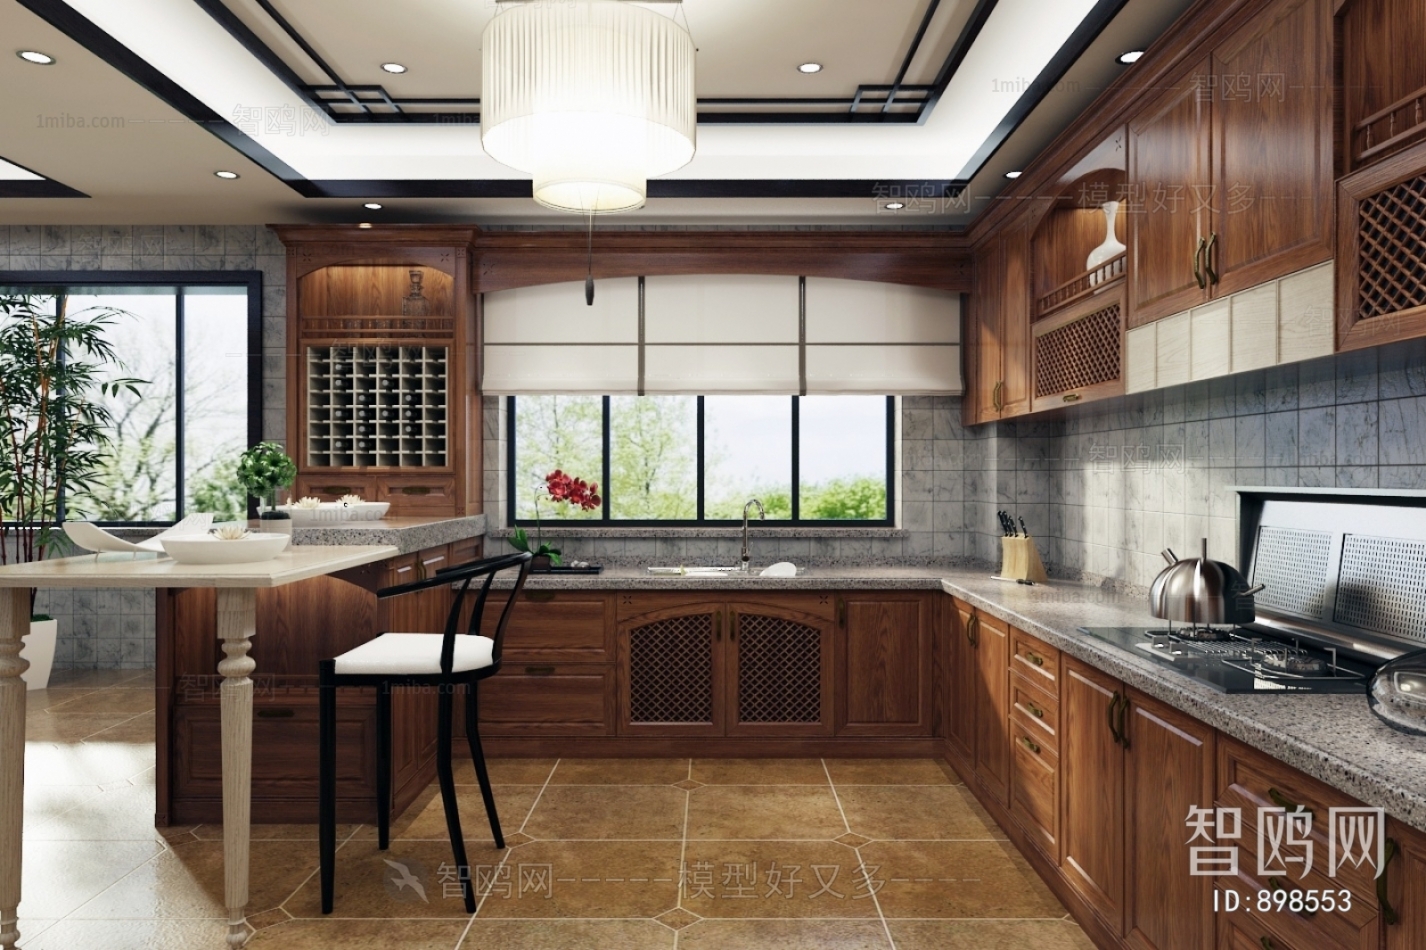 New Chinese Style The Kitchen